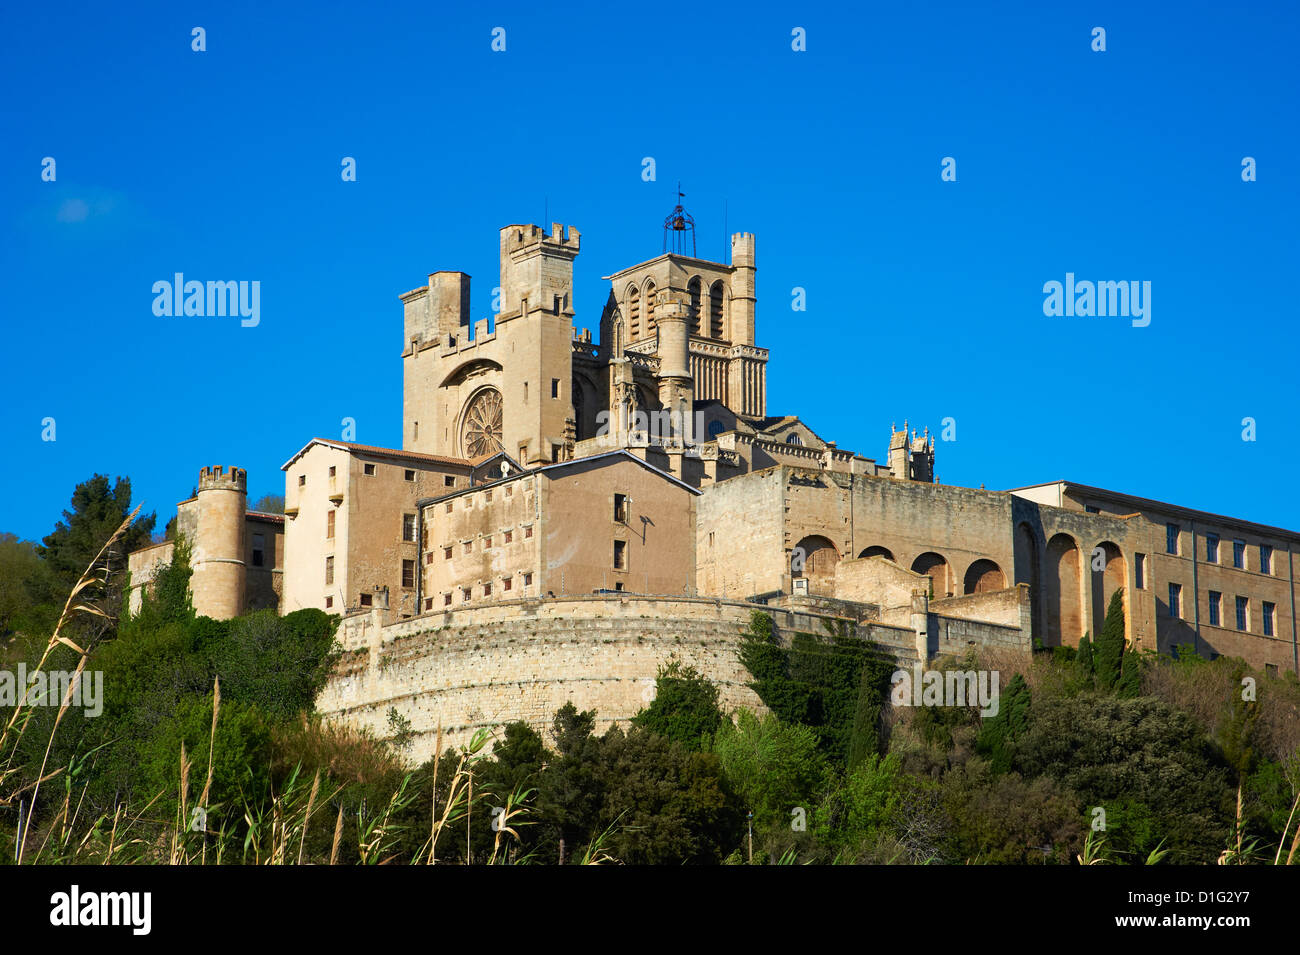 Cattedrale Saint-Nazaire, Beziers, Herault, Languedoc, Francia, Europa Foto Stock